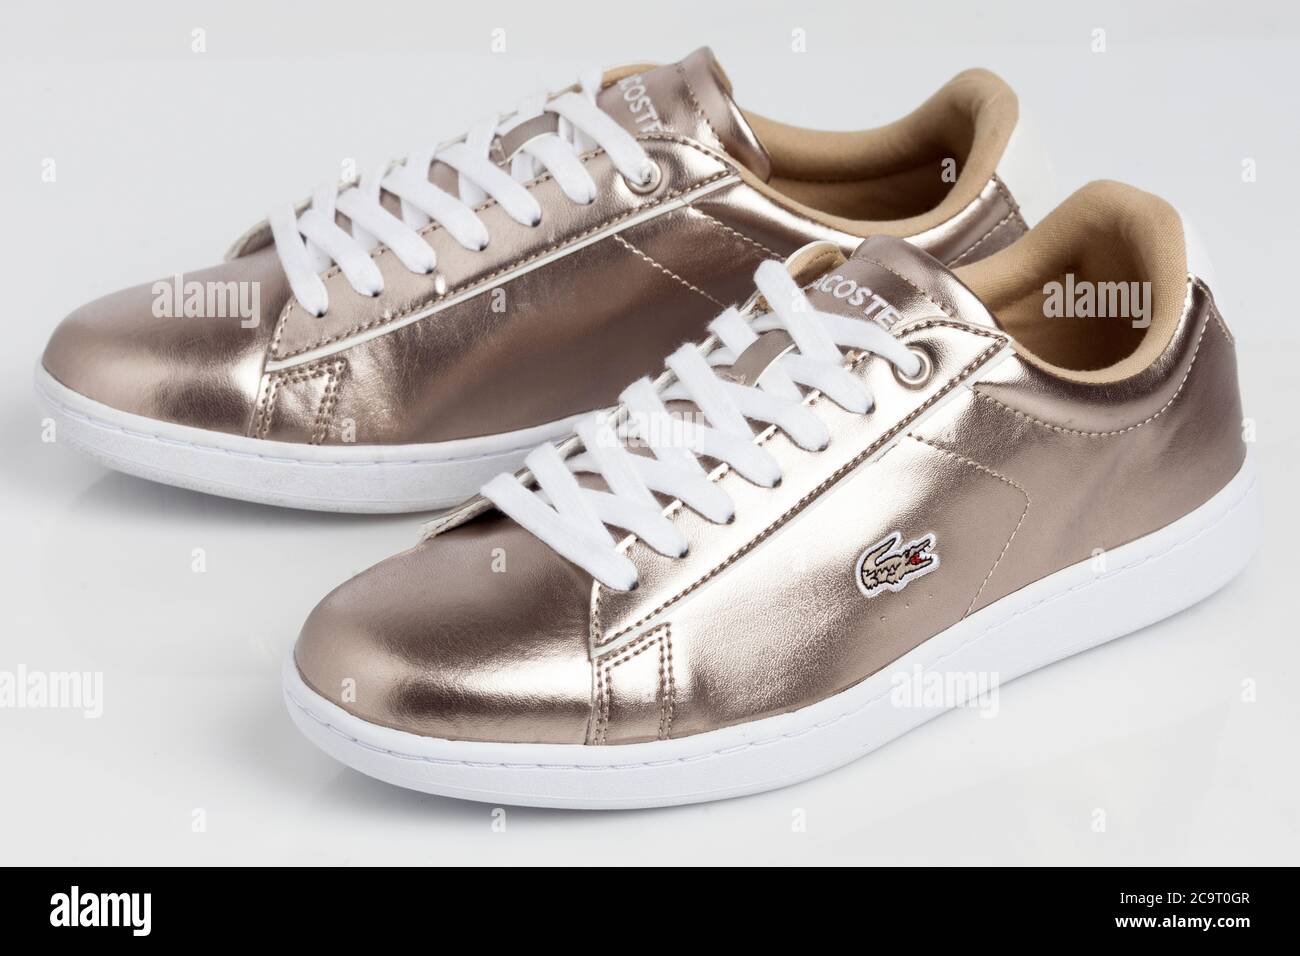 Lacoste sneakers on background Stock Photo - Alamy